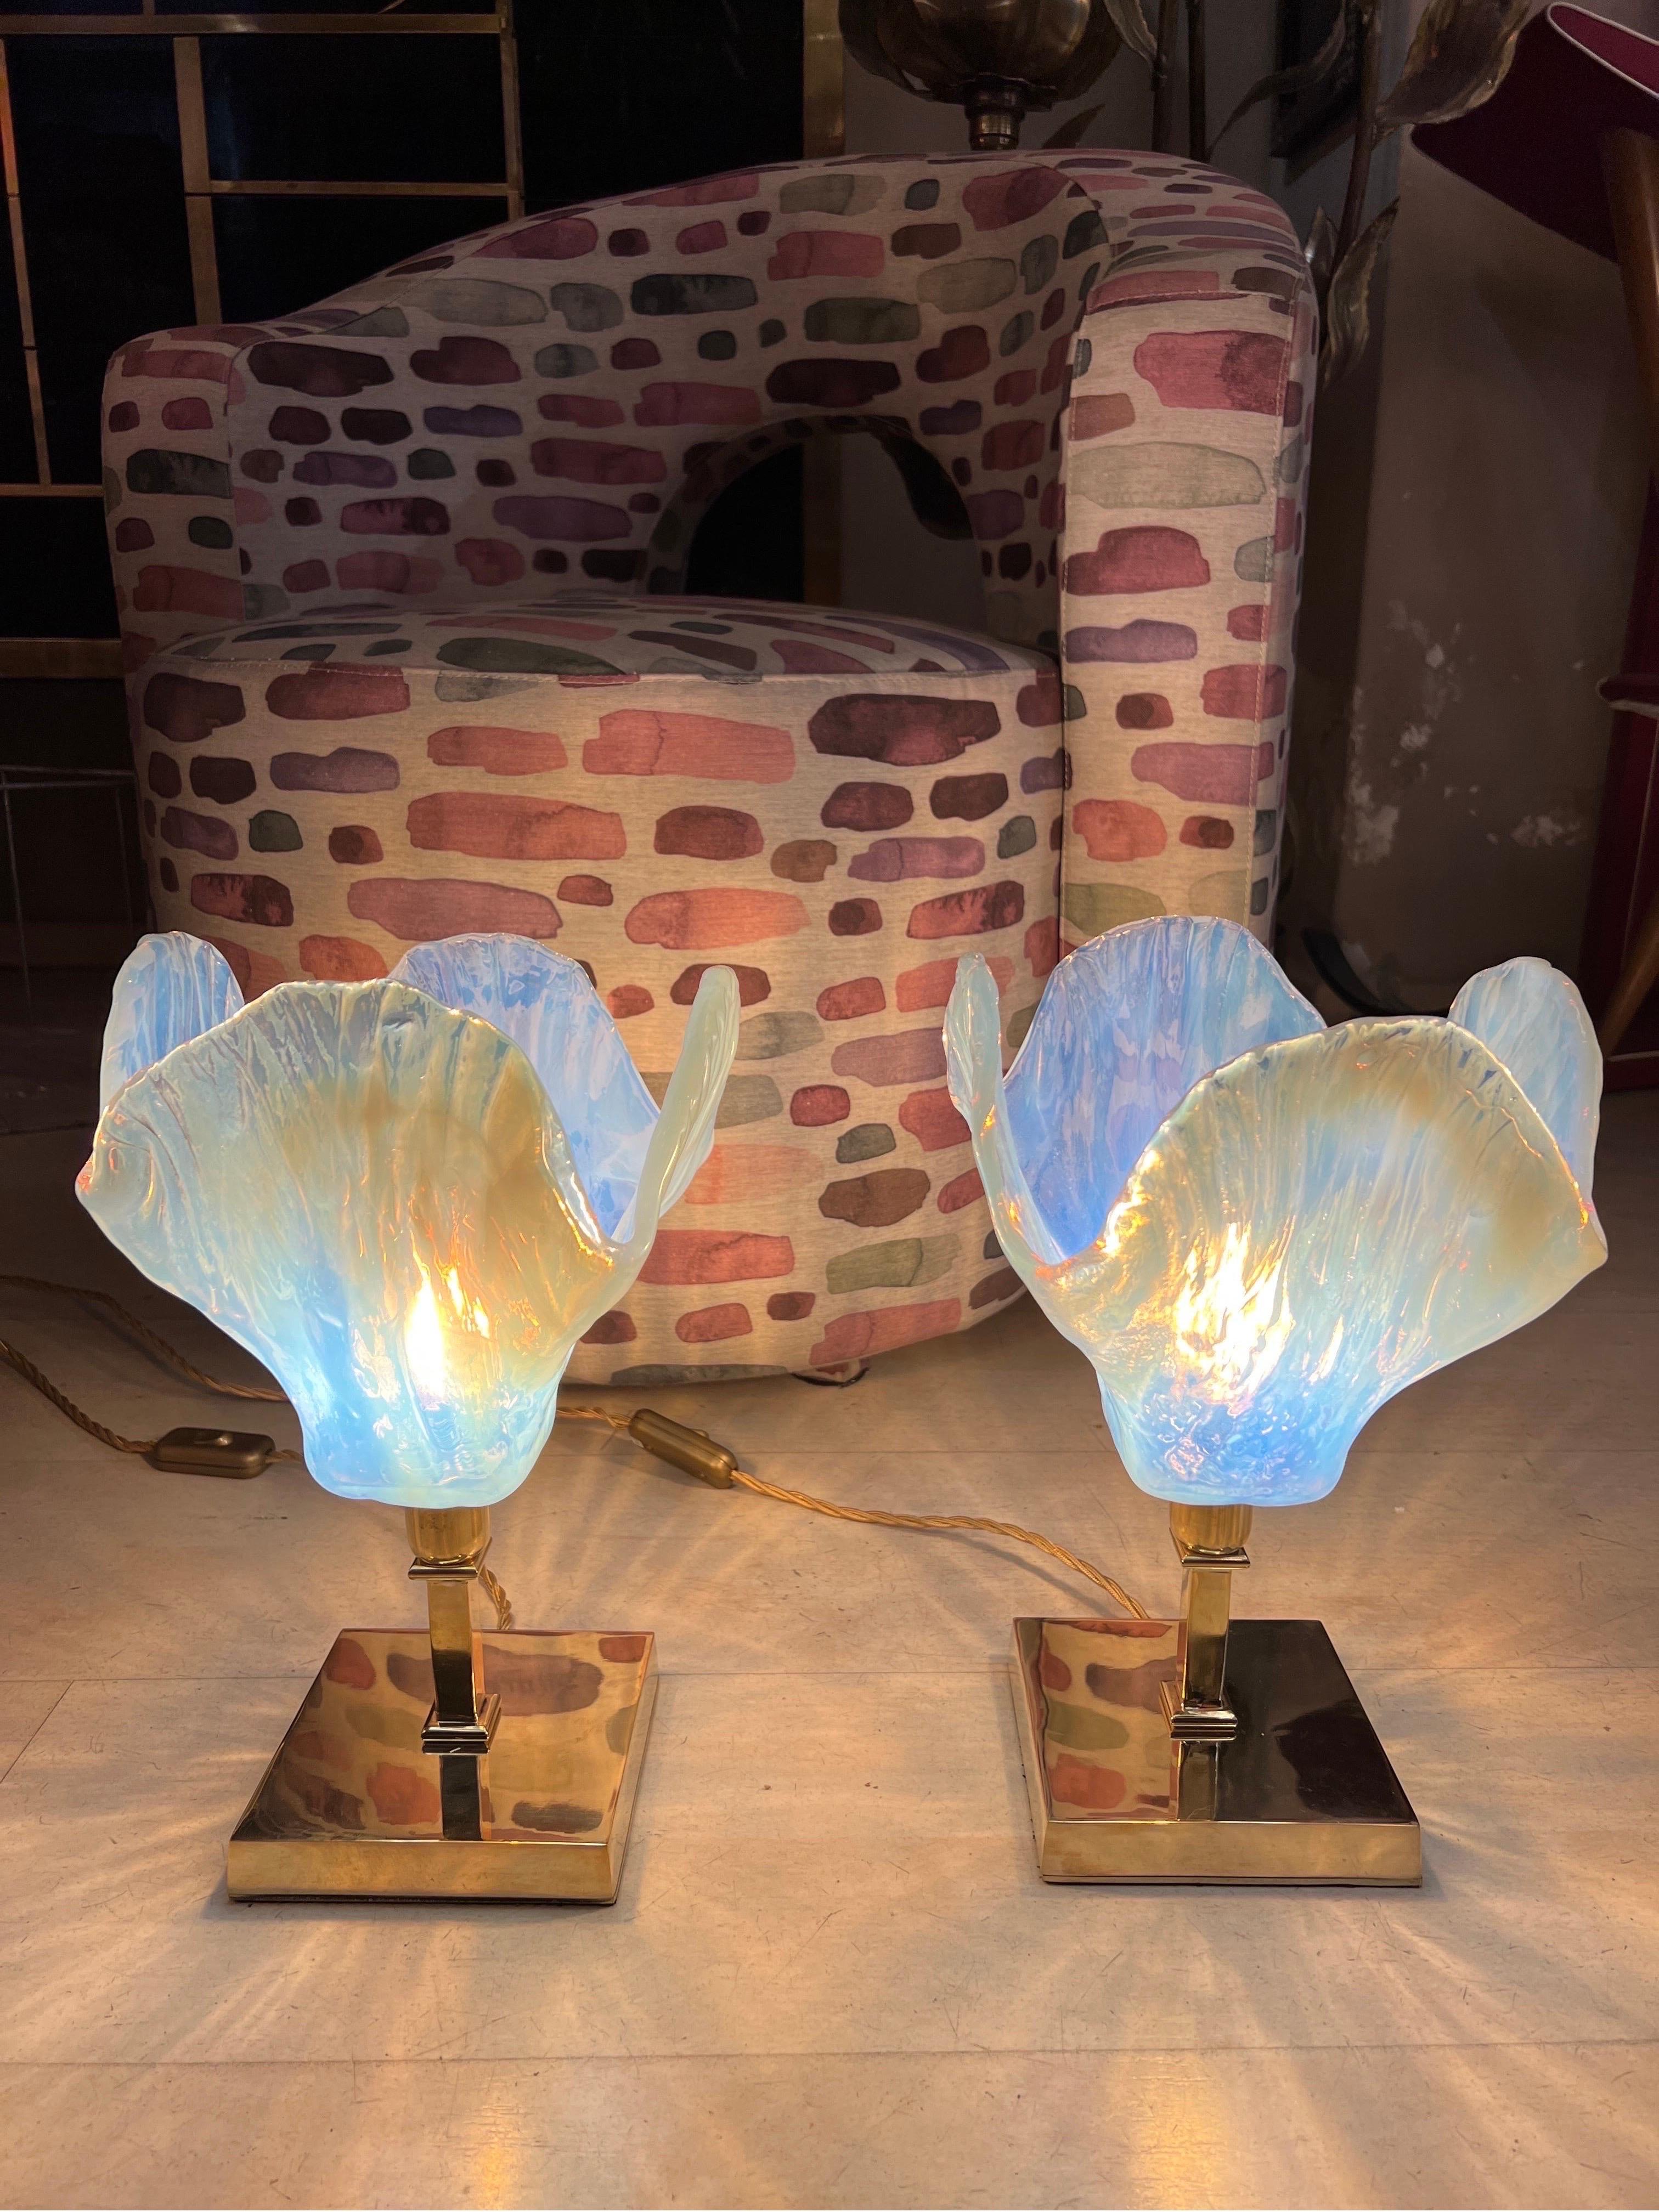 Pair of Vintage light blue Murano glass flower table lamps with brass squared base.
The hand-blown light blue Murano glass has an amazing opalescent effect from light blue to amber tones.
One light bulb each lamp.